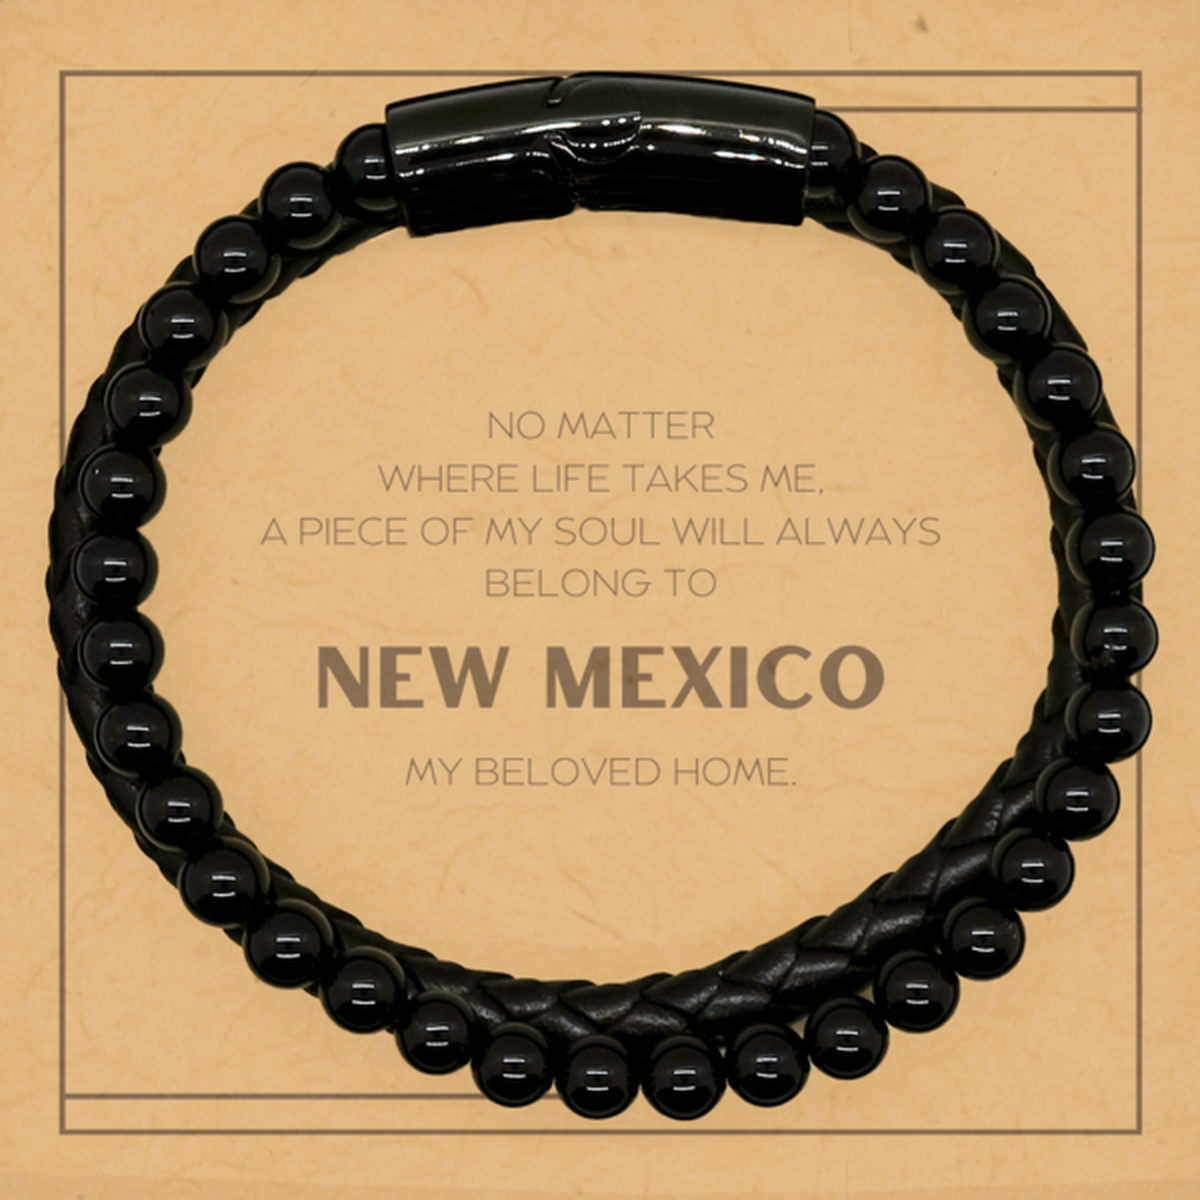 Love New Mexico State Gifts, My soul will always belong to New Mexico, Proud Stone Leather Bracelets, Birthday Unique Gifts For New Mexico Men, Women, Friends